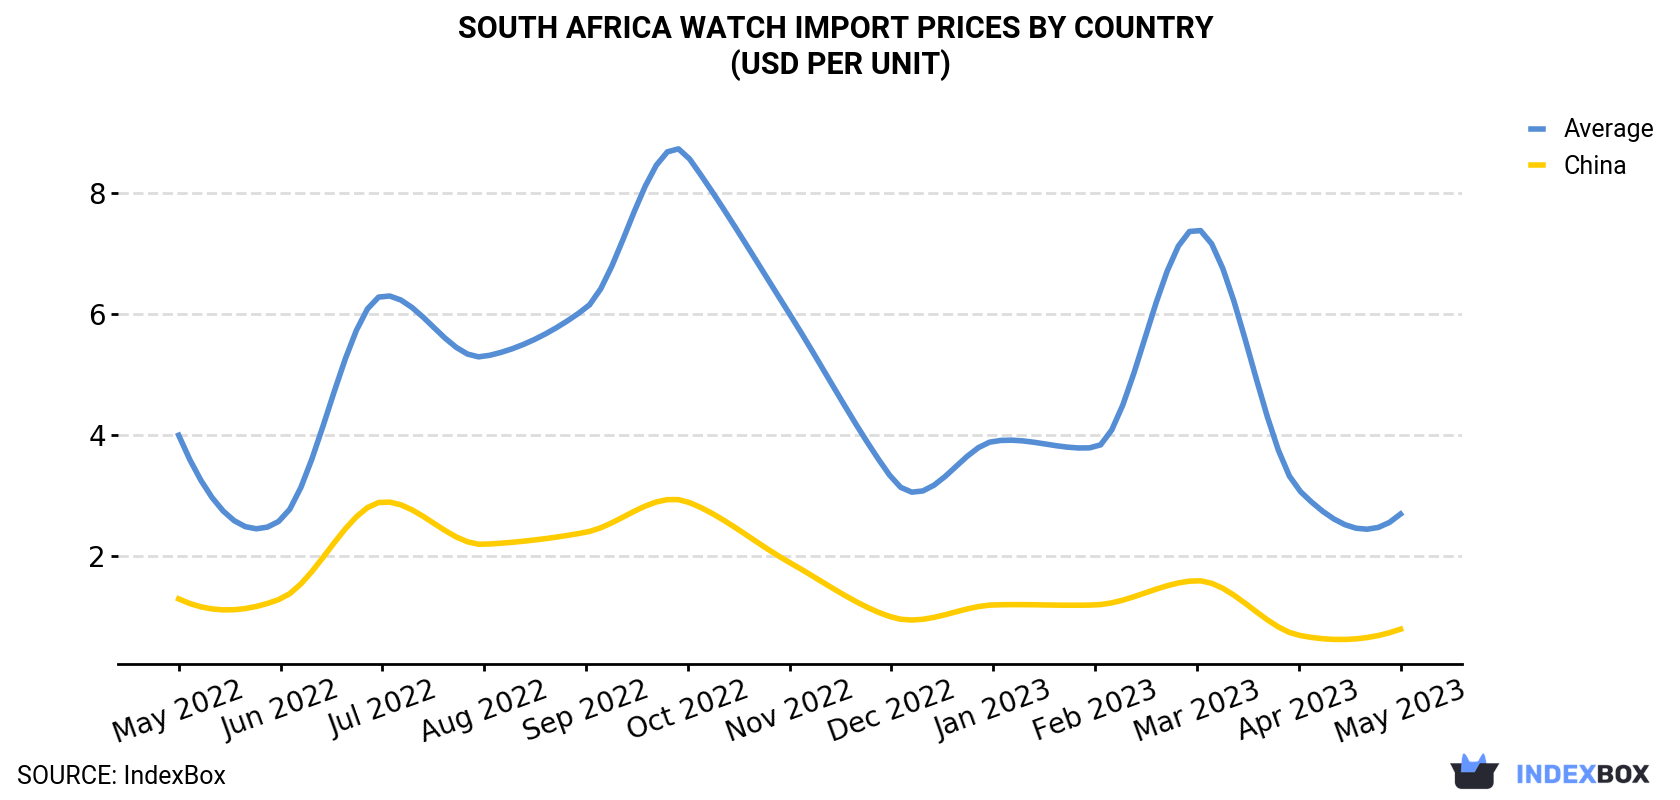 South Africa Watch Import Prices By Country (USD Per Unit)